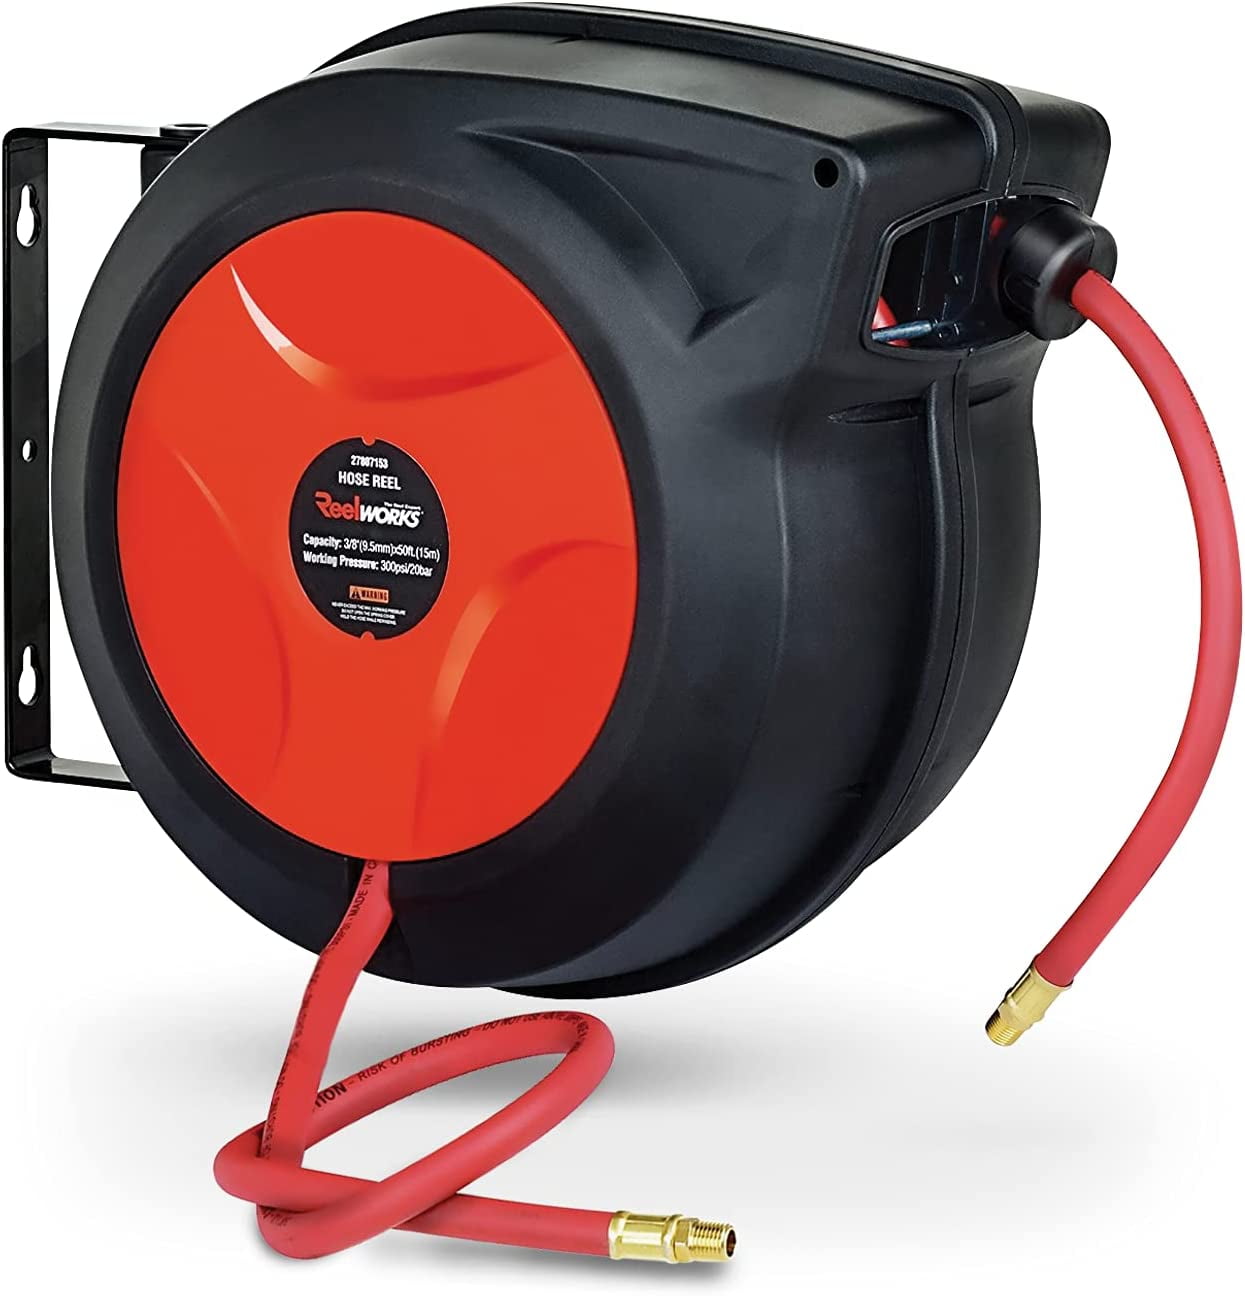 ReelWorks Air Hose Reel - Retractable 3/8 x 50' with 3' Lead-In Hose &  1/4 NPT Connections - Mountable 